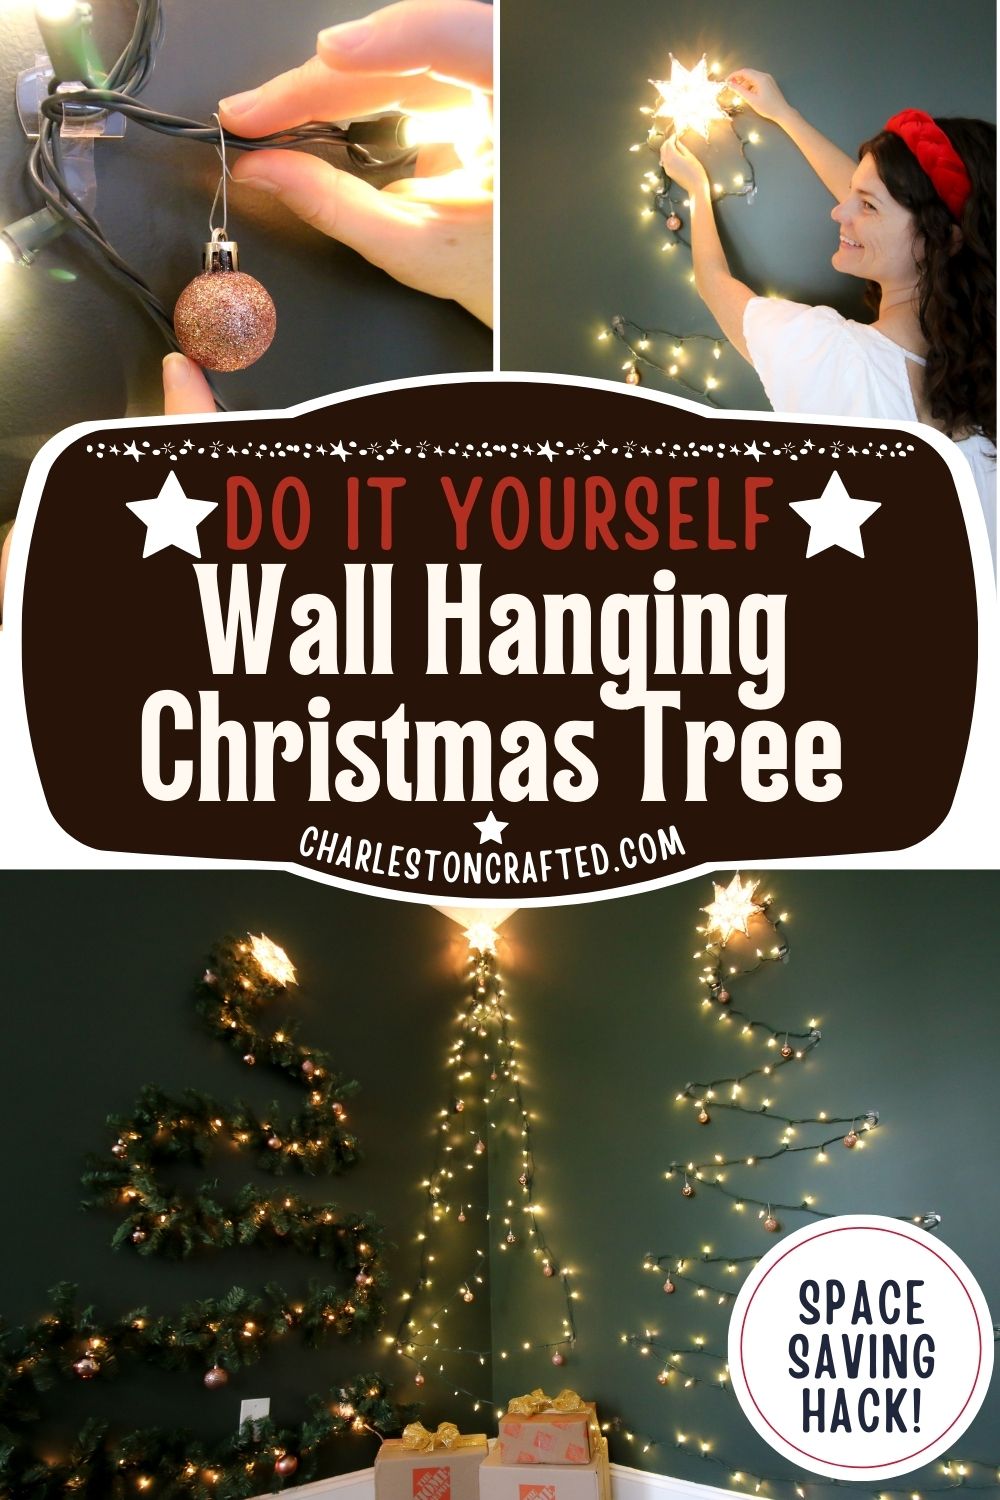 https://www.charlestoncrafted.com/wp-content/uploads/2022/10/DIY-wall-hanging-christmas-tree-made-from-lights.jpg